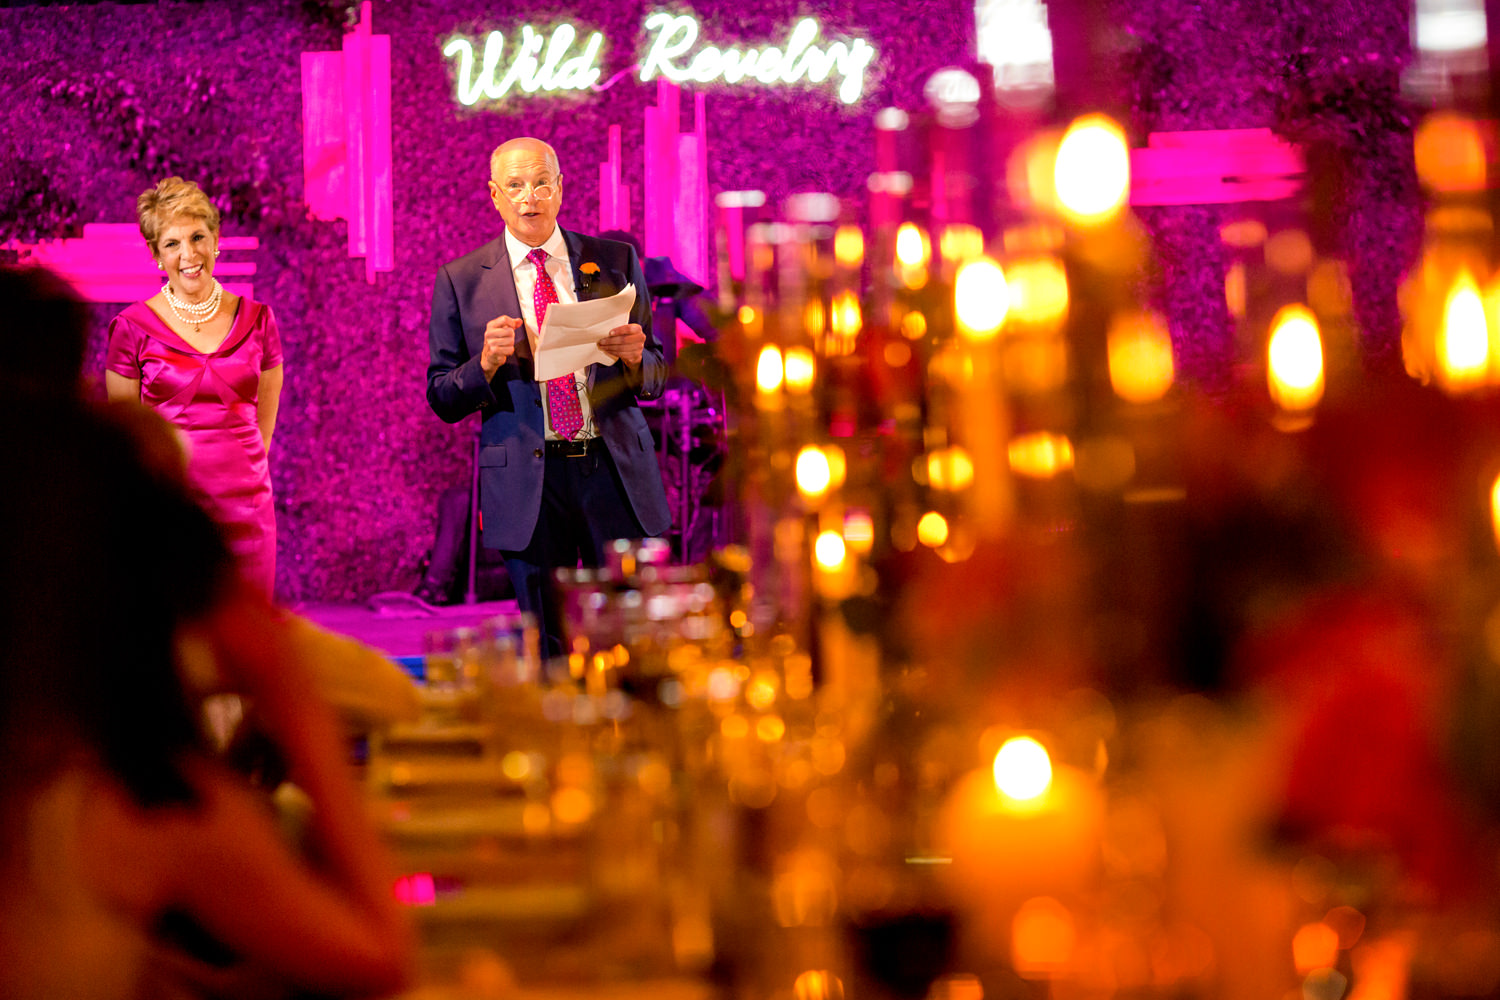 Washington DC, Union Market, Dock 5, father of the bride giving a welcome speech and the photo was shot through the golden candle glow of a long kings table with the parents talking at the far end of the table, the oranges are contrasted with the hot pink feature wall behind them, reception, intense colors, Procopio Photography, best top Washington DC photographer, best top Maryland photographer, best top Virginia photographer, best top DMV photographer, best top wedding photographer, best top commercial photographer, best top portrait photographer, best top boudoir photographer, modern fine art portraits, dramatic, unique, different, bold, editorial, photojournalism, award winning photographer, published photographer, memorable images, be different, stand out